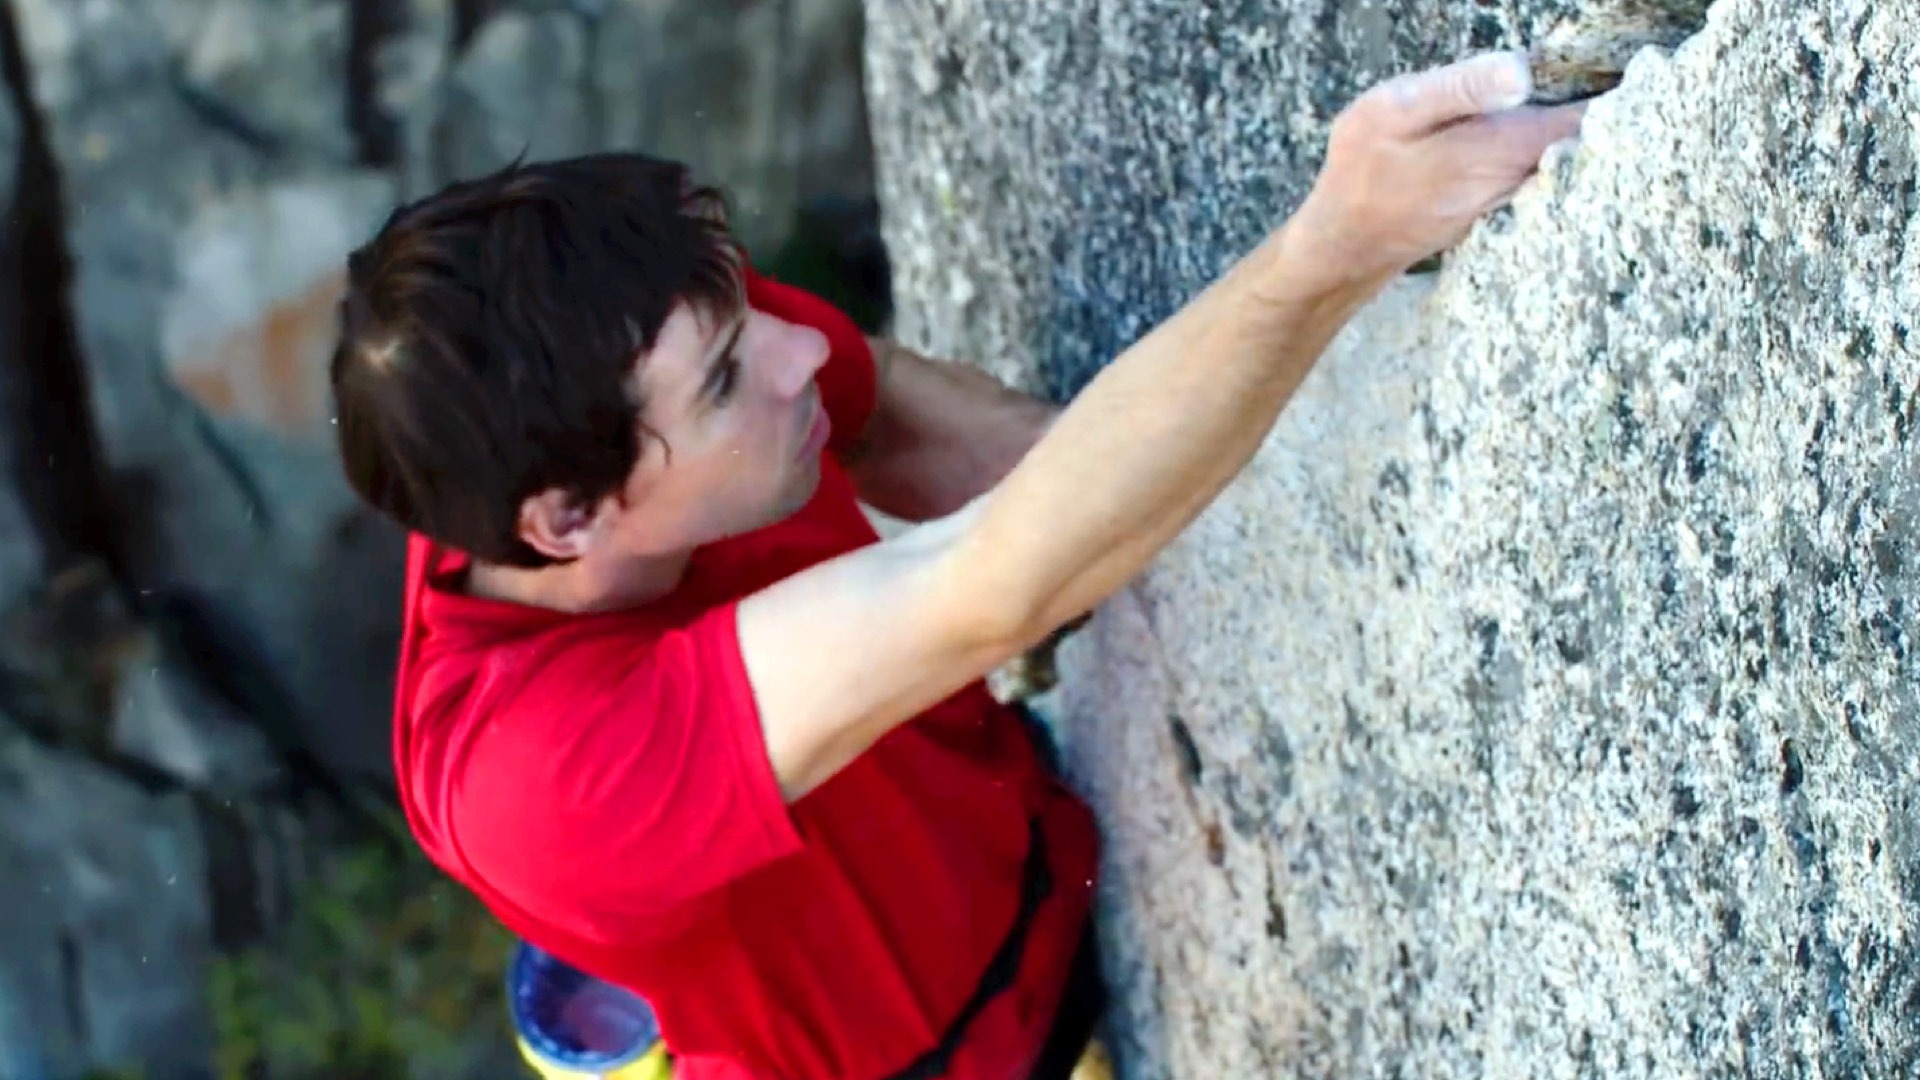 Follow Alex Honnold as he becomes the first person to ever free solo climb ...